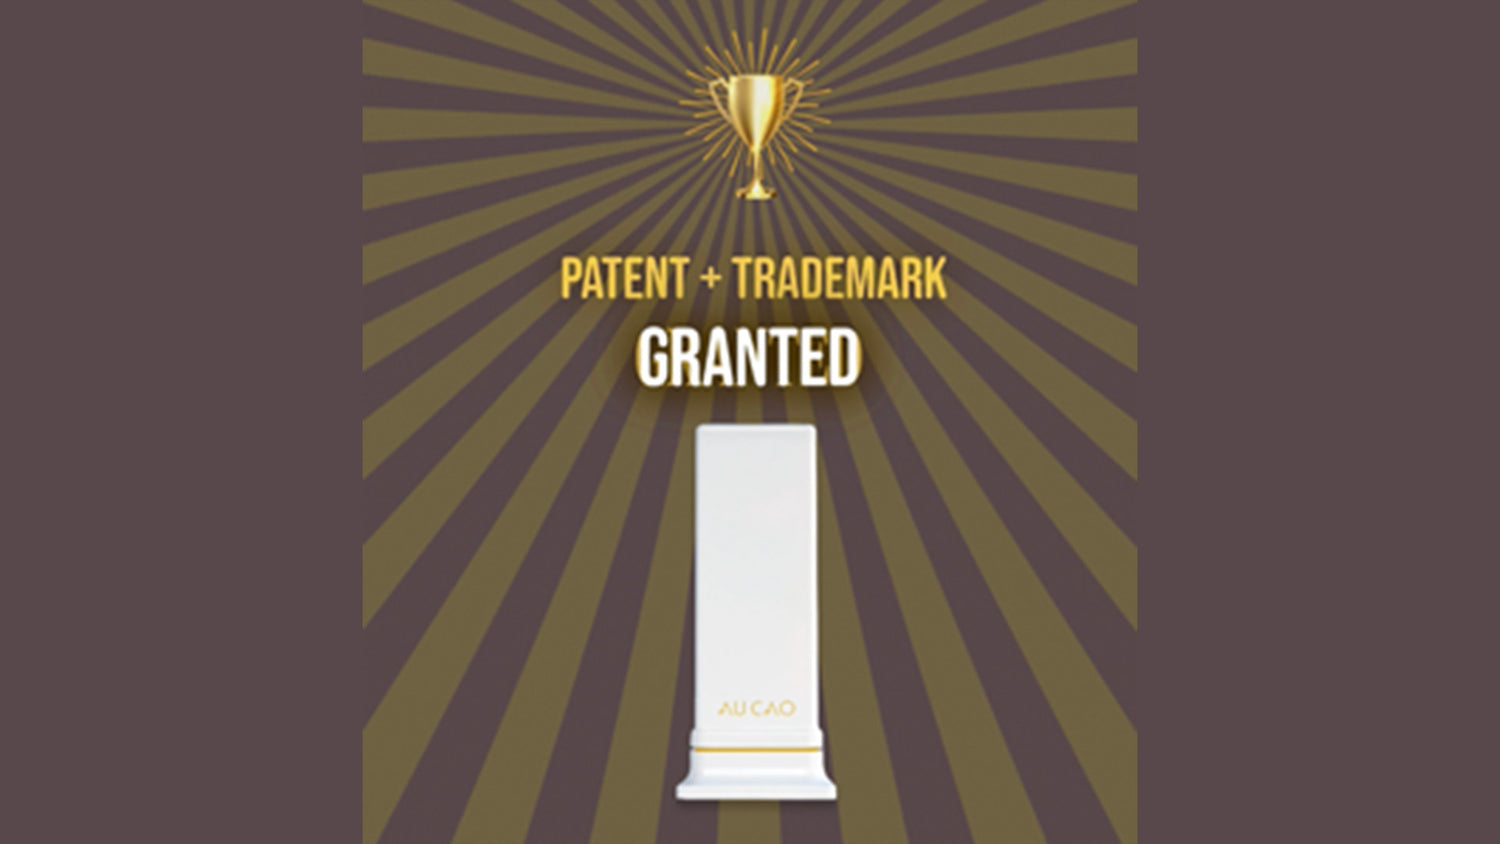 Patent and Trademark granted